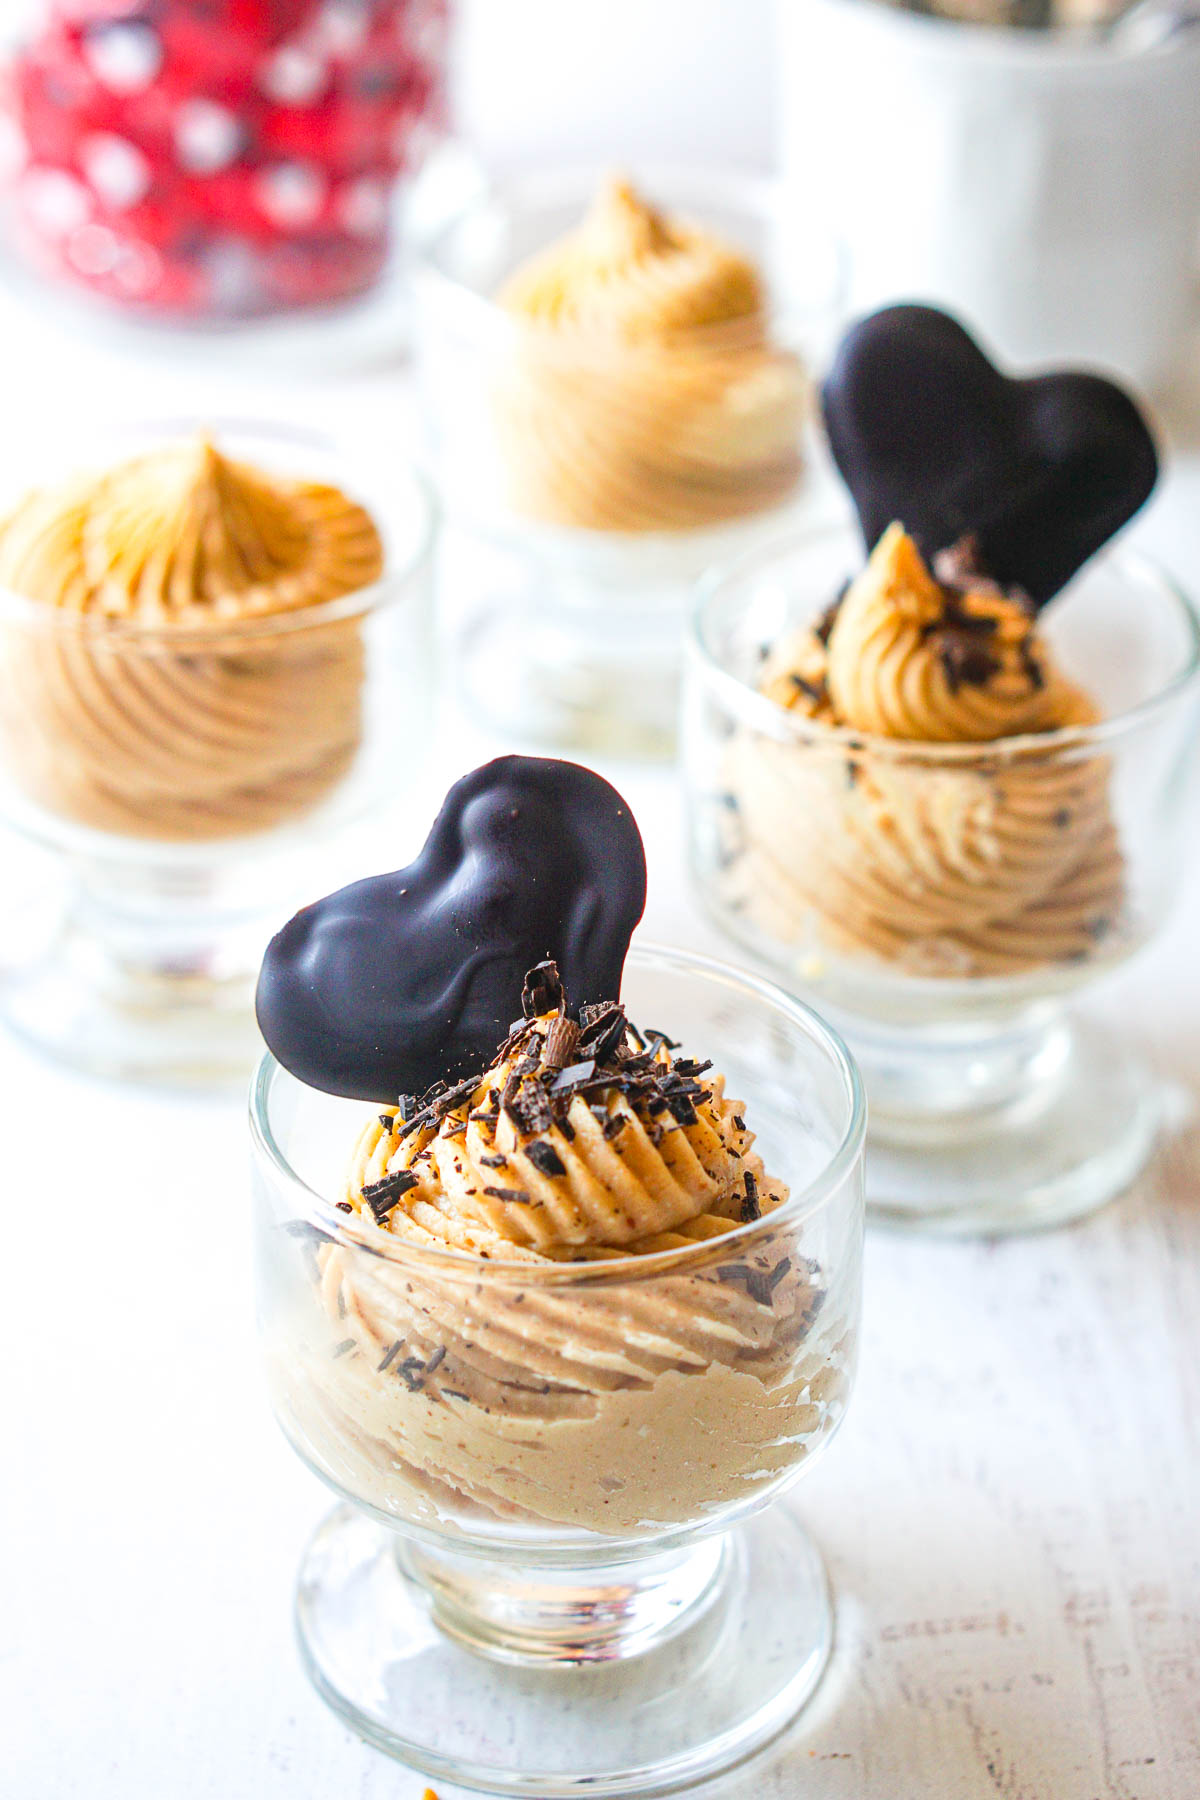 4 glass dishes with sugar free peanut butter cream cheese fluff with chocolate valentines hearts